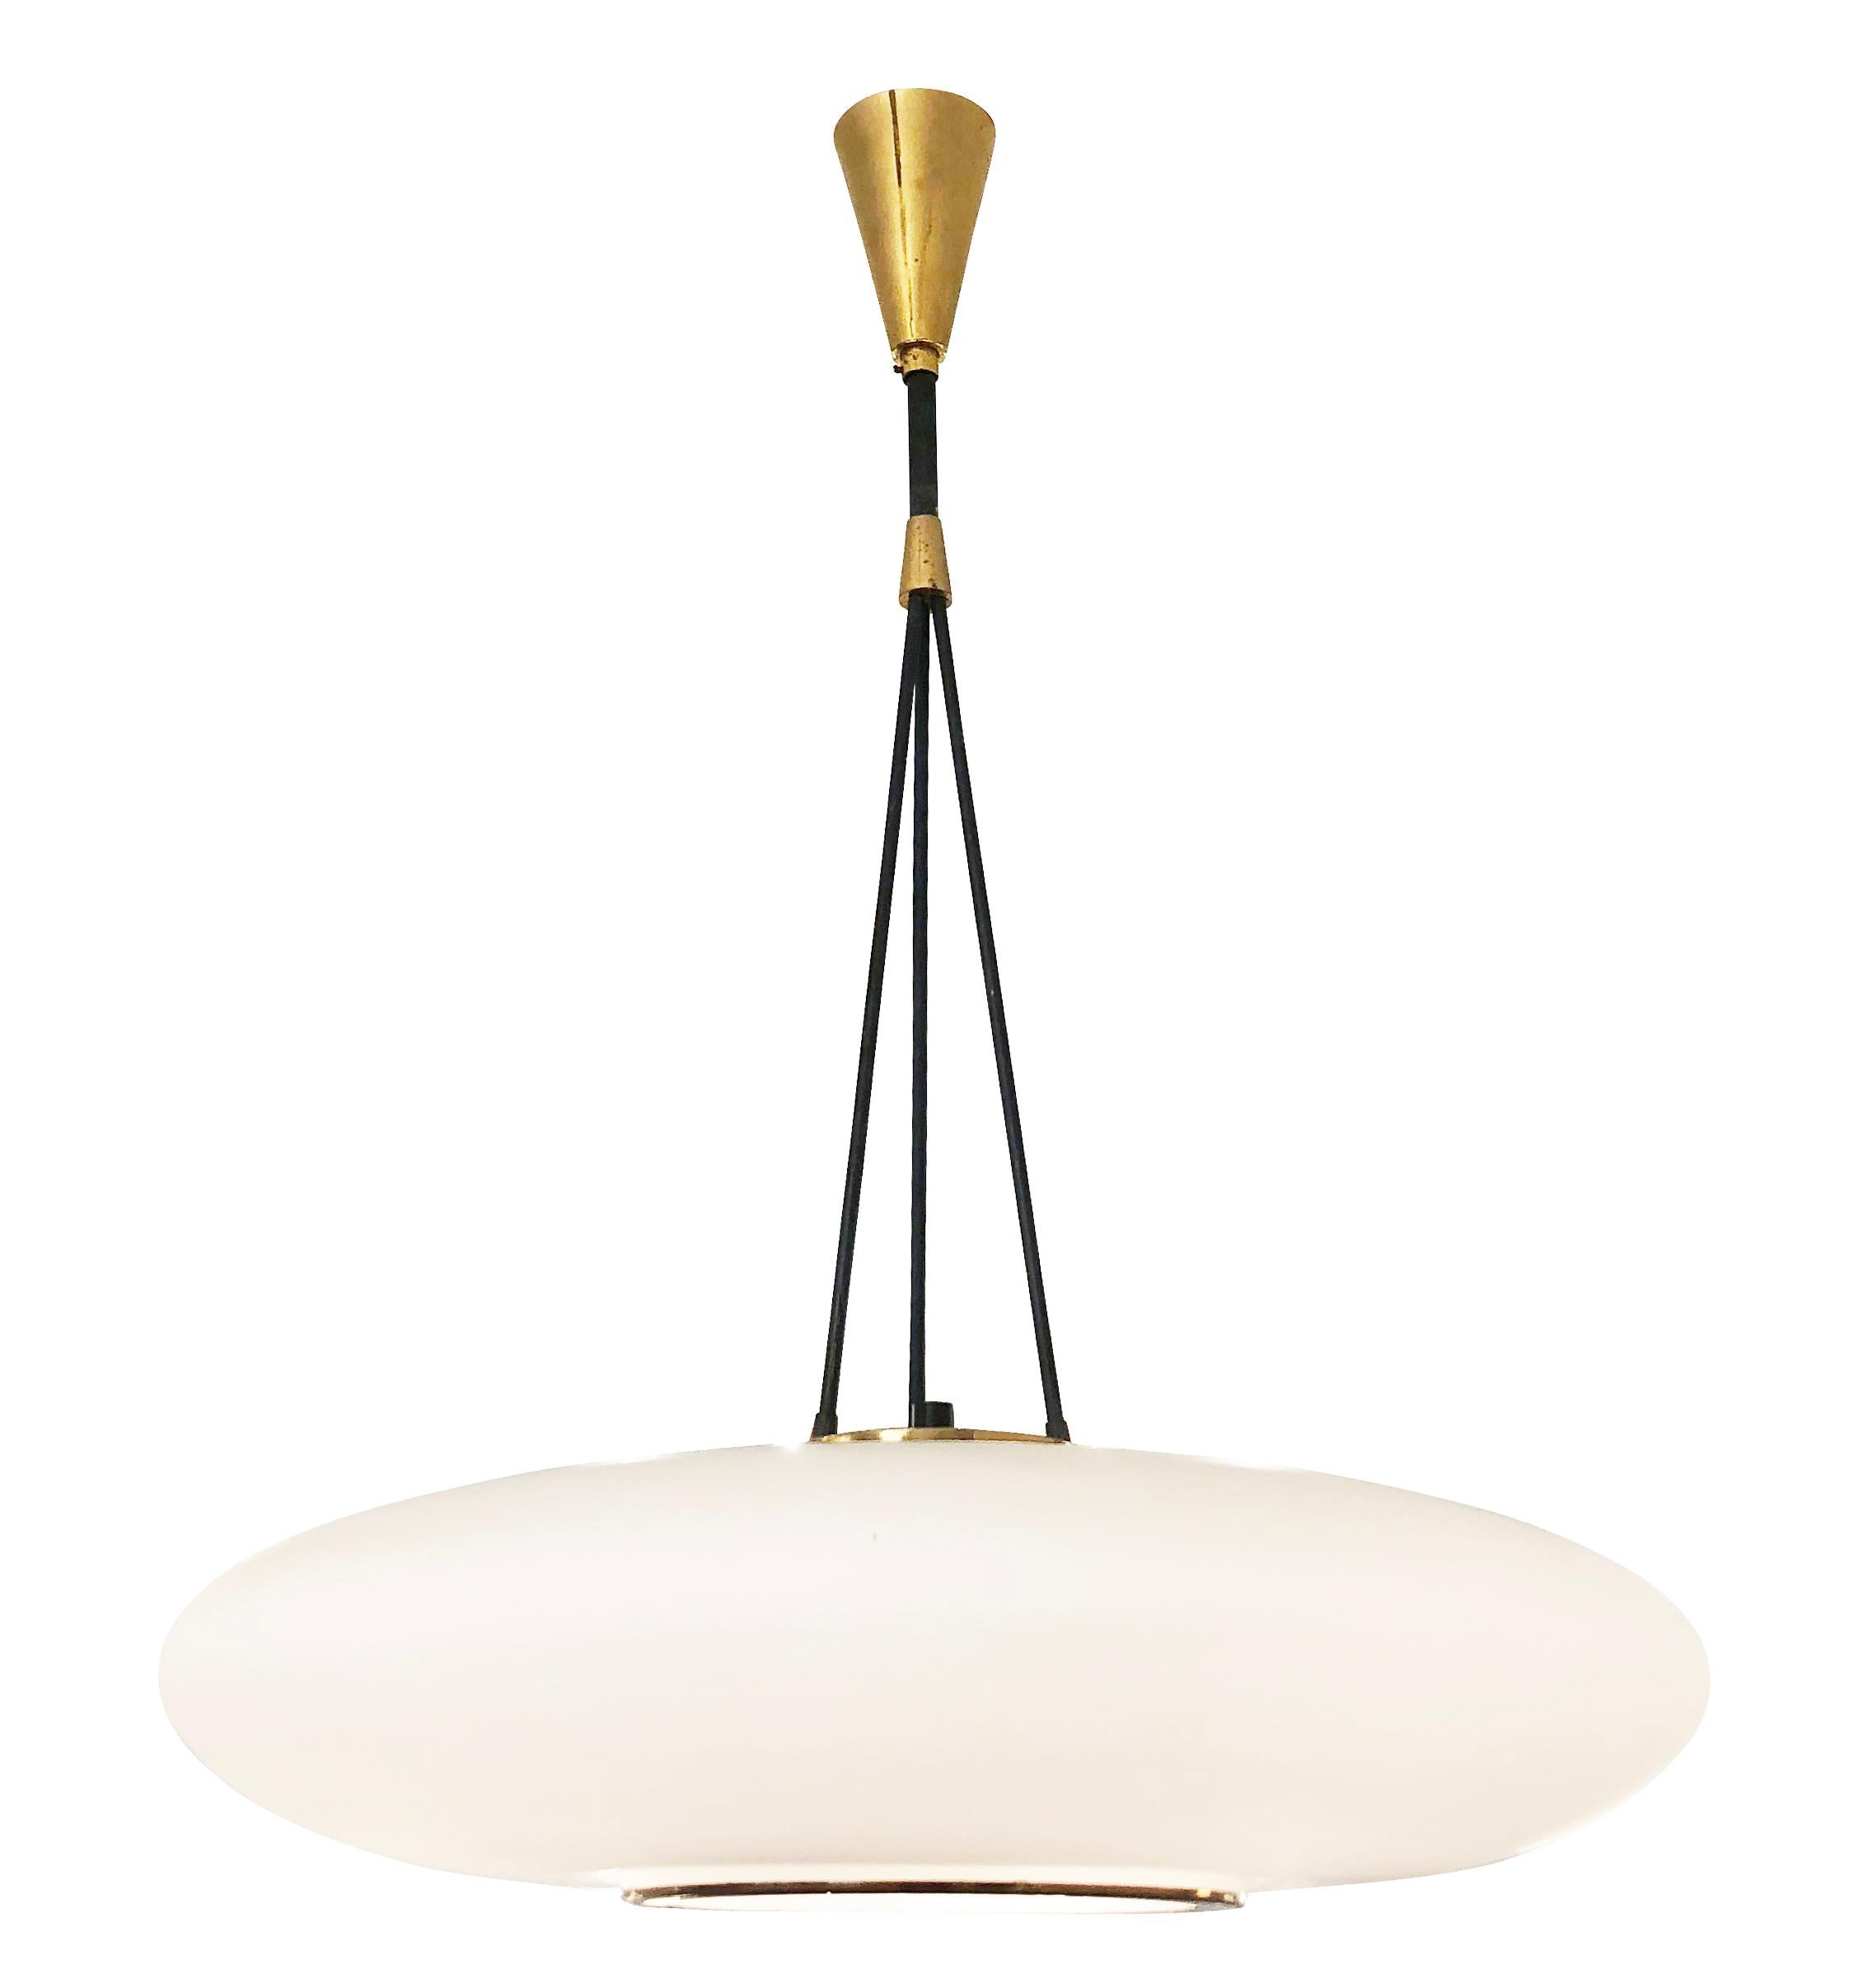 1960s Stilnovo Style pendant with an elliptical frosted glass shade. The opening on the bottom has a brass rim and the three stems on top coverage in a large main stem. Holds three candelabra sockets.

Condition: Excellent vintage condition, minor